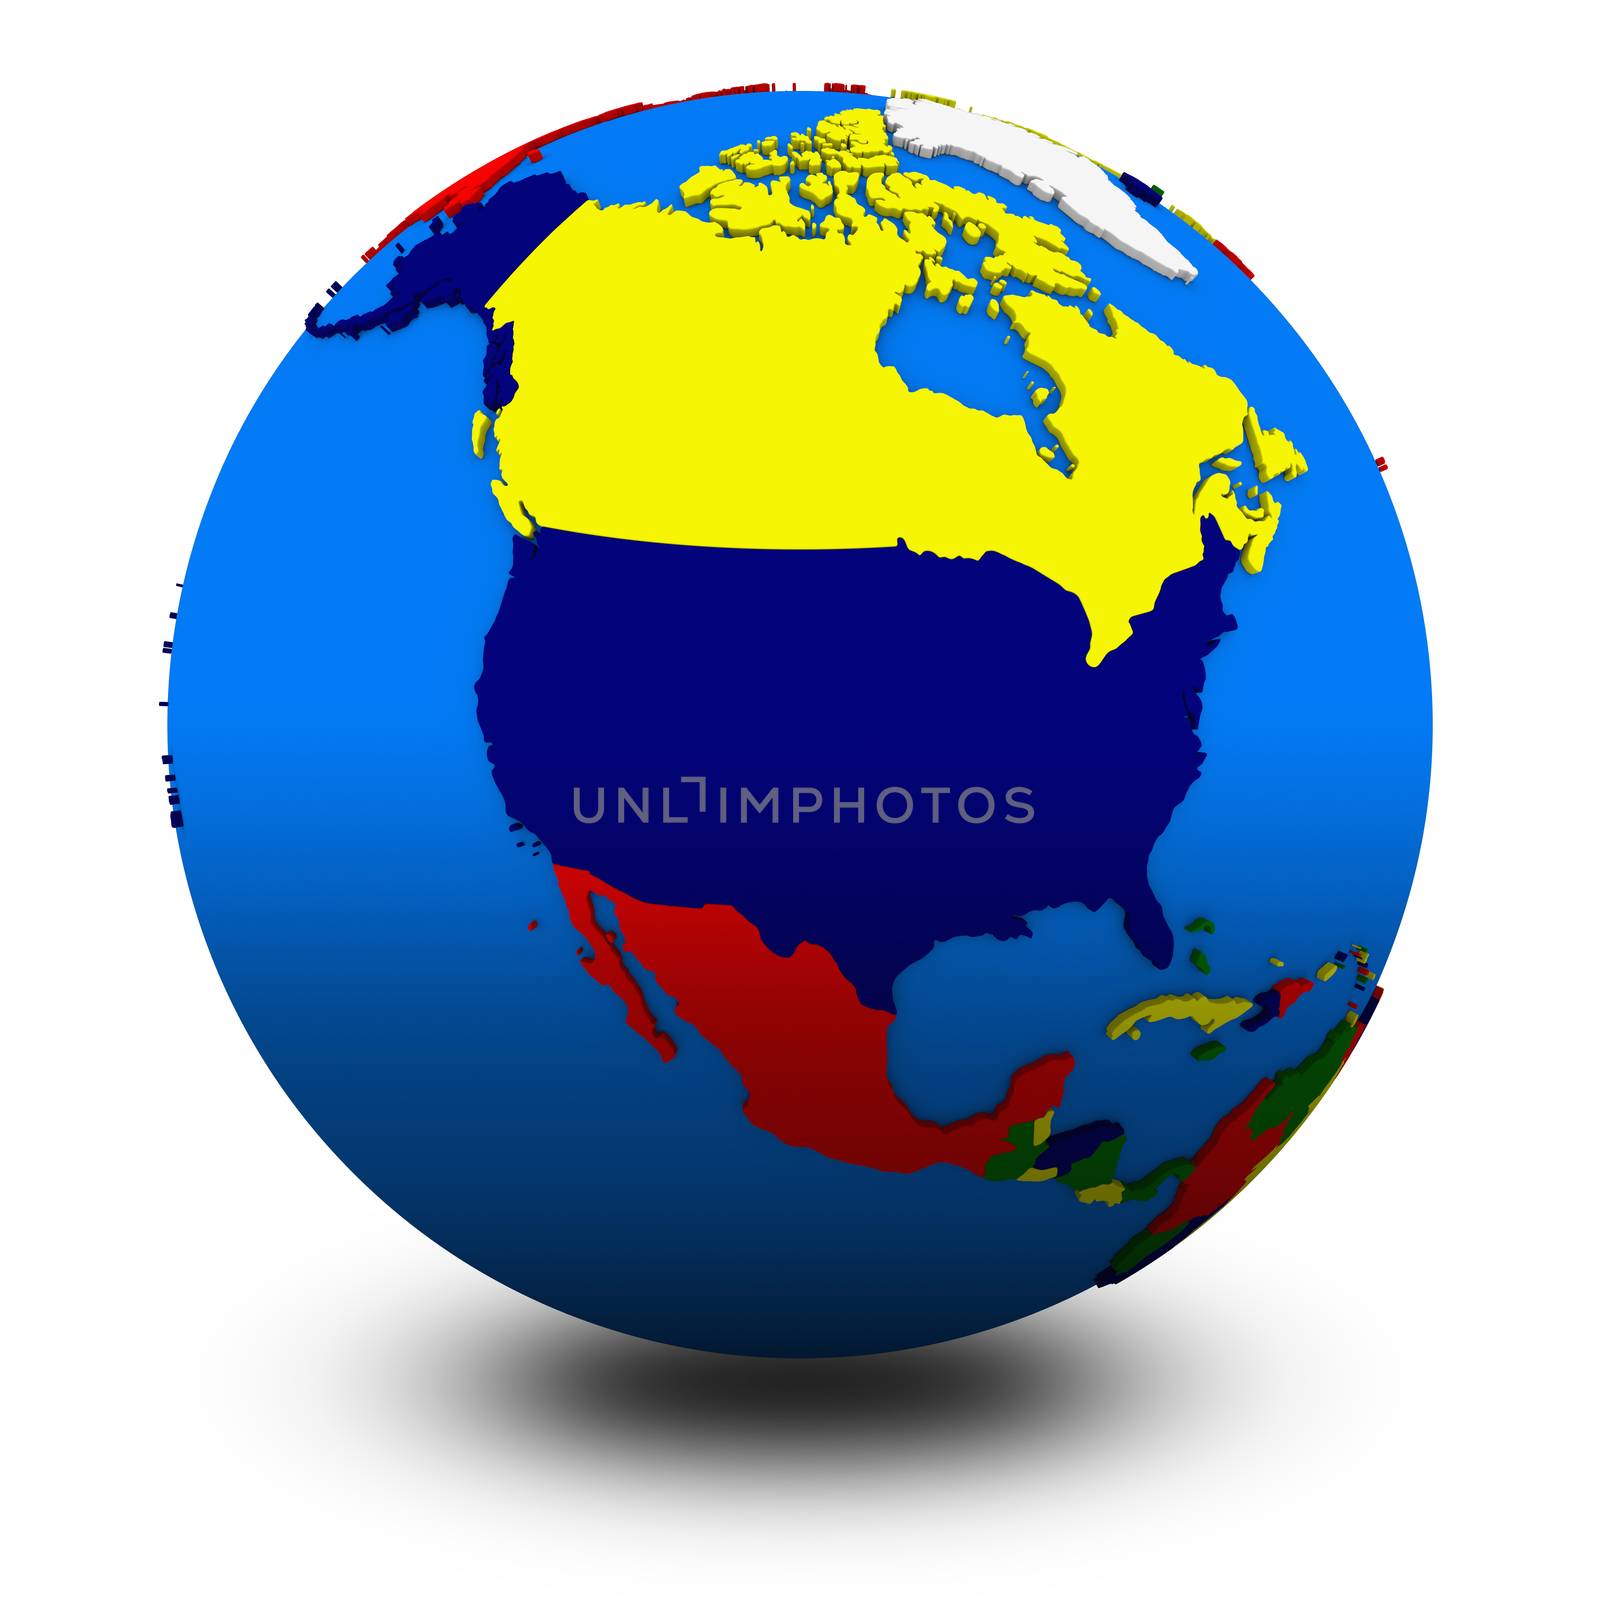 north America on political globe, illustration isolated on white background with shadow